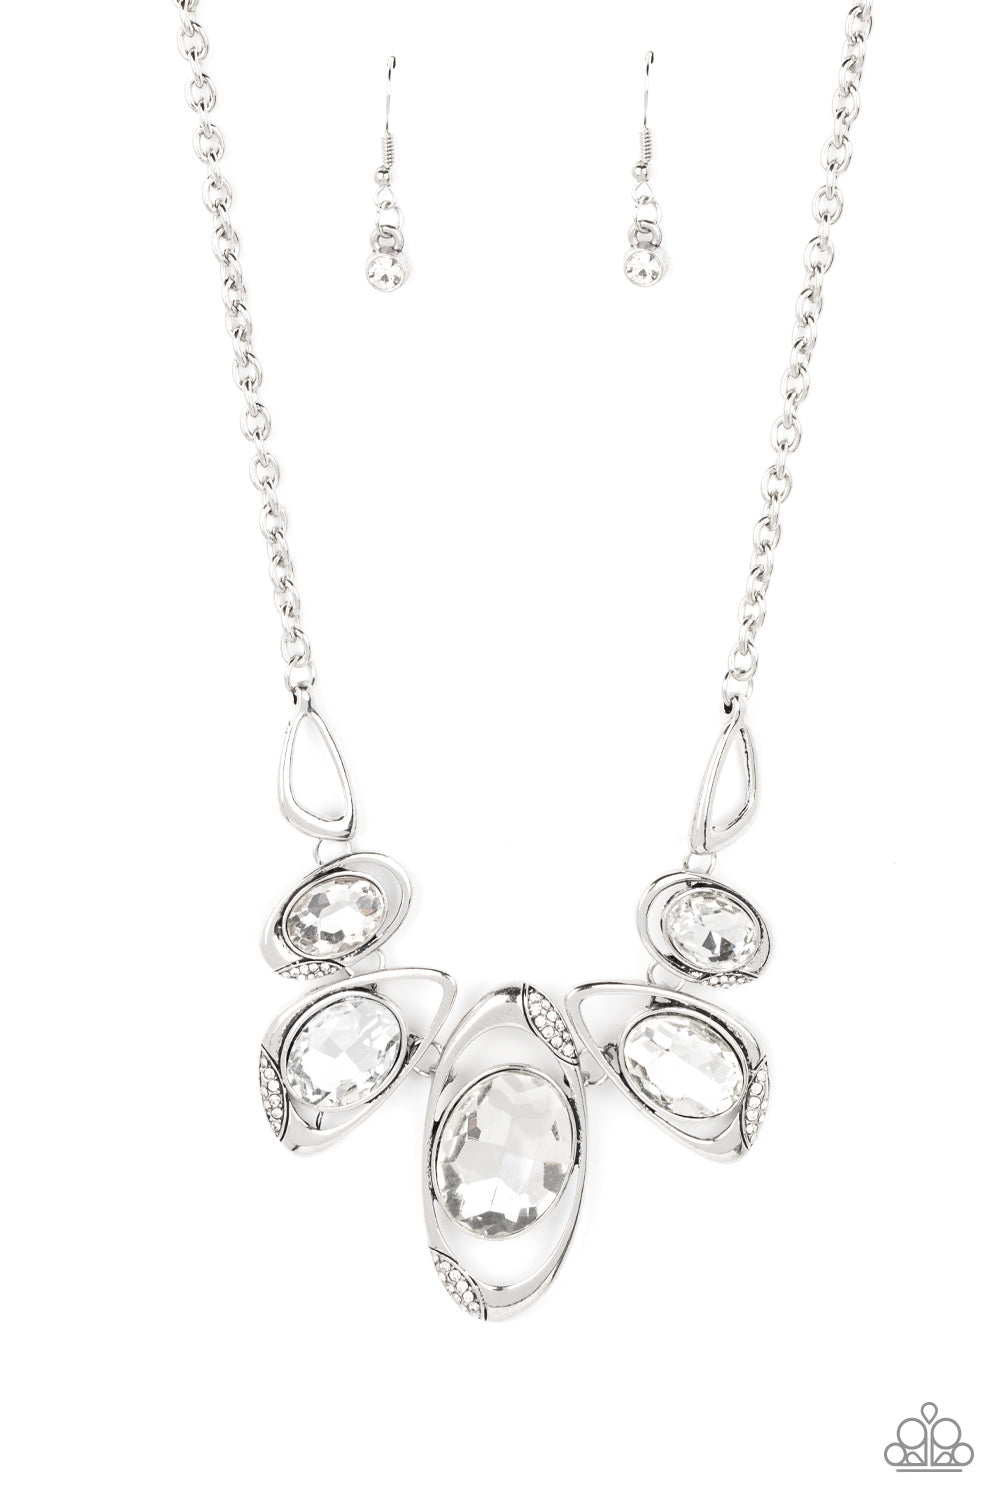 Hypnotic Twinkle - White Gem and Silver Necklace - Paparazzi Accessories - This stunning gem necklace is stunning and great for any occasion or everyday casual wear.  It's dusted in sections of glassy white rhinestones, asymmetrical silver frames curl around oversized white gems below the collar. Varying in shape, the mismatched frames increase in size as they near the center for a hypnotizing finish. Bejeweled Accessories By Kristie 